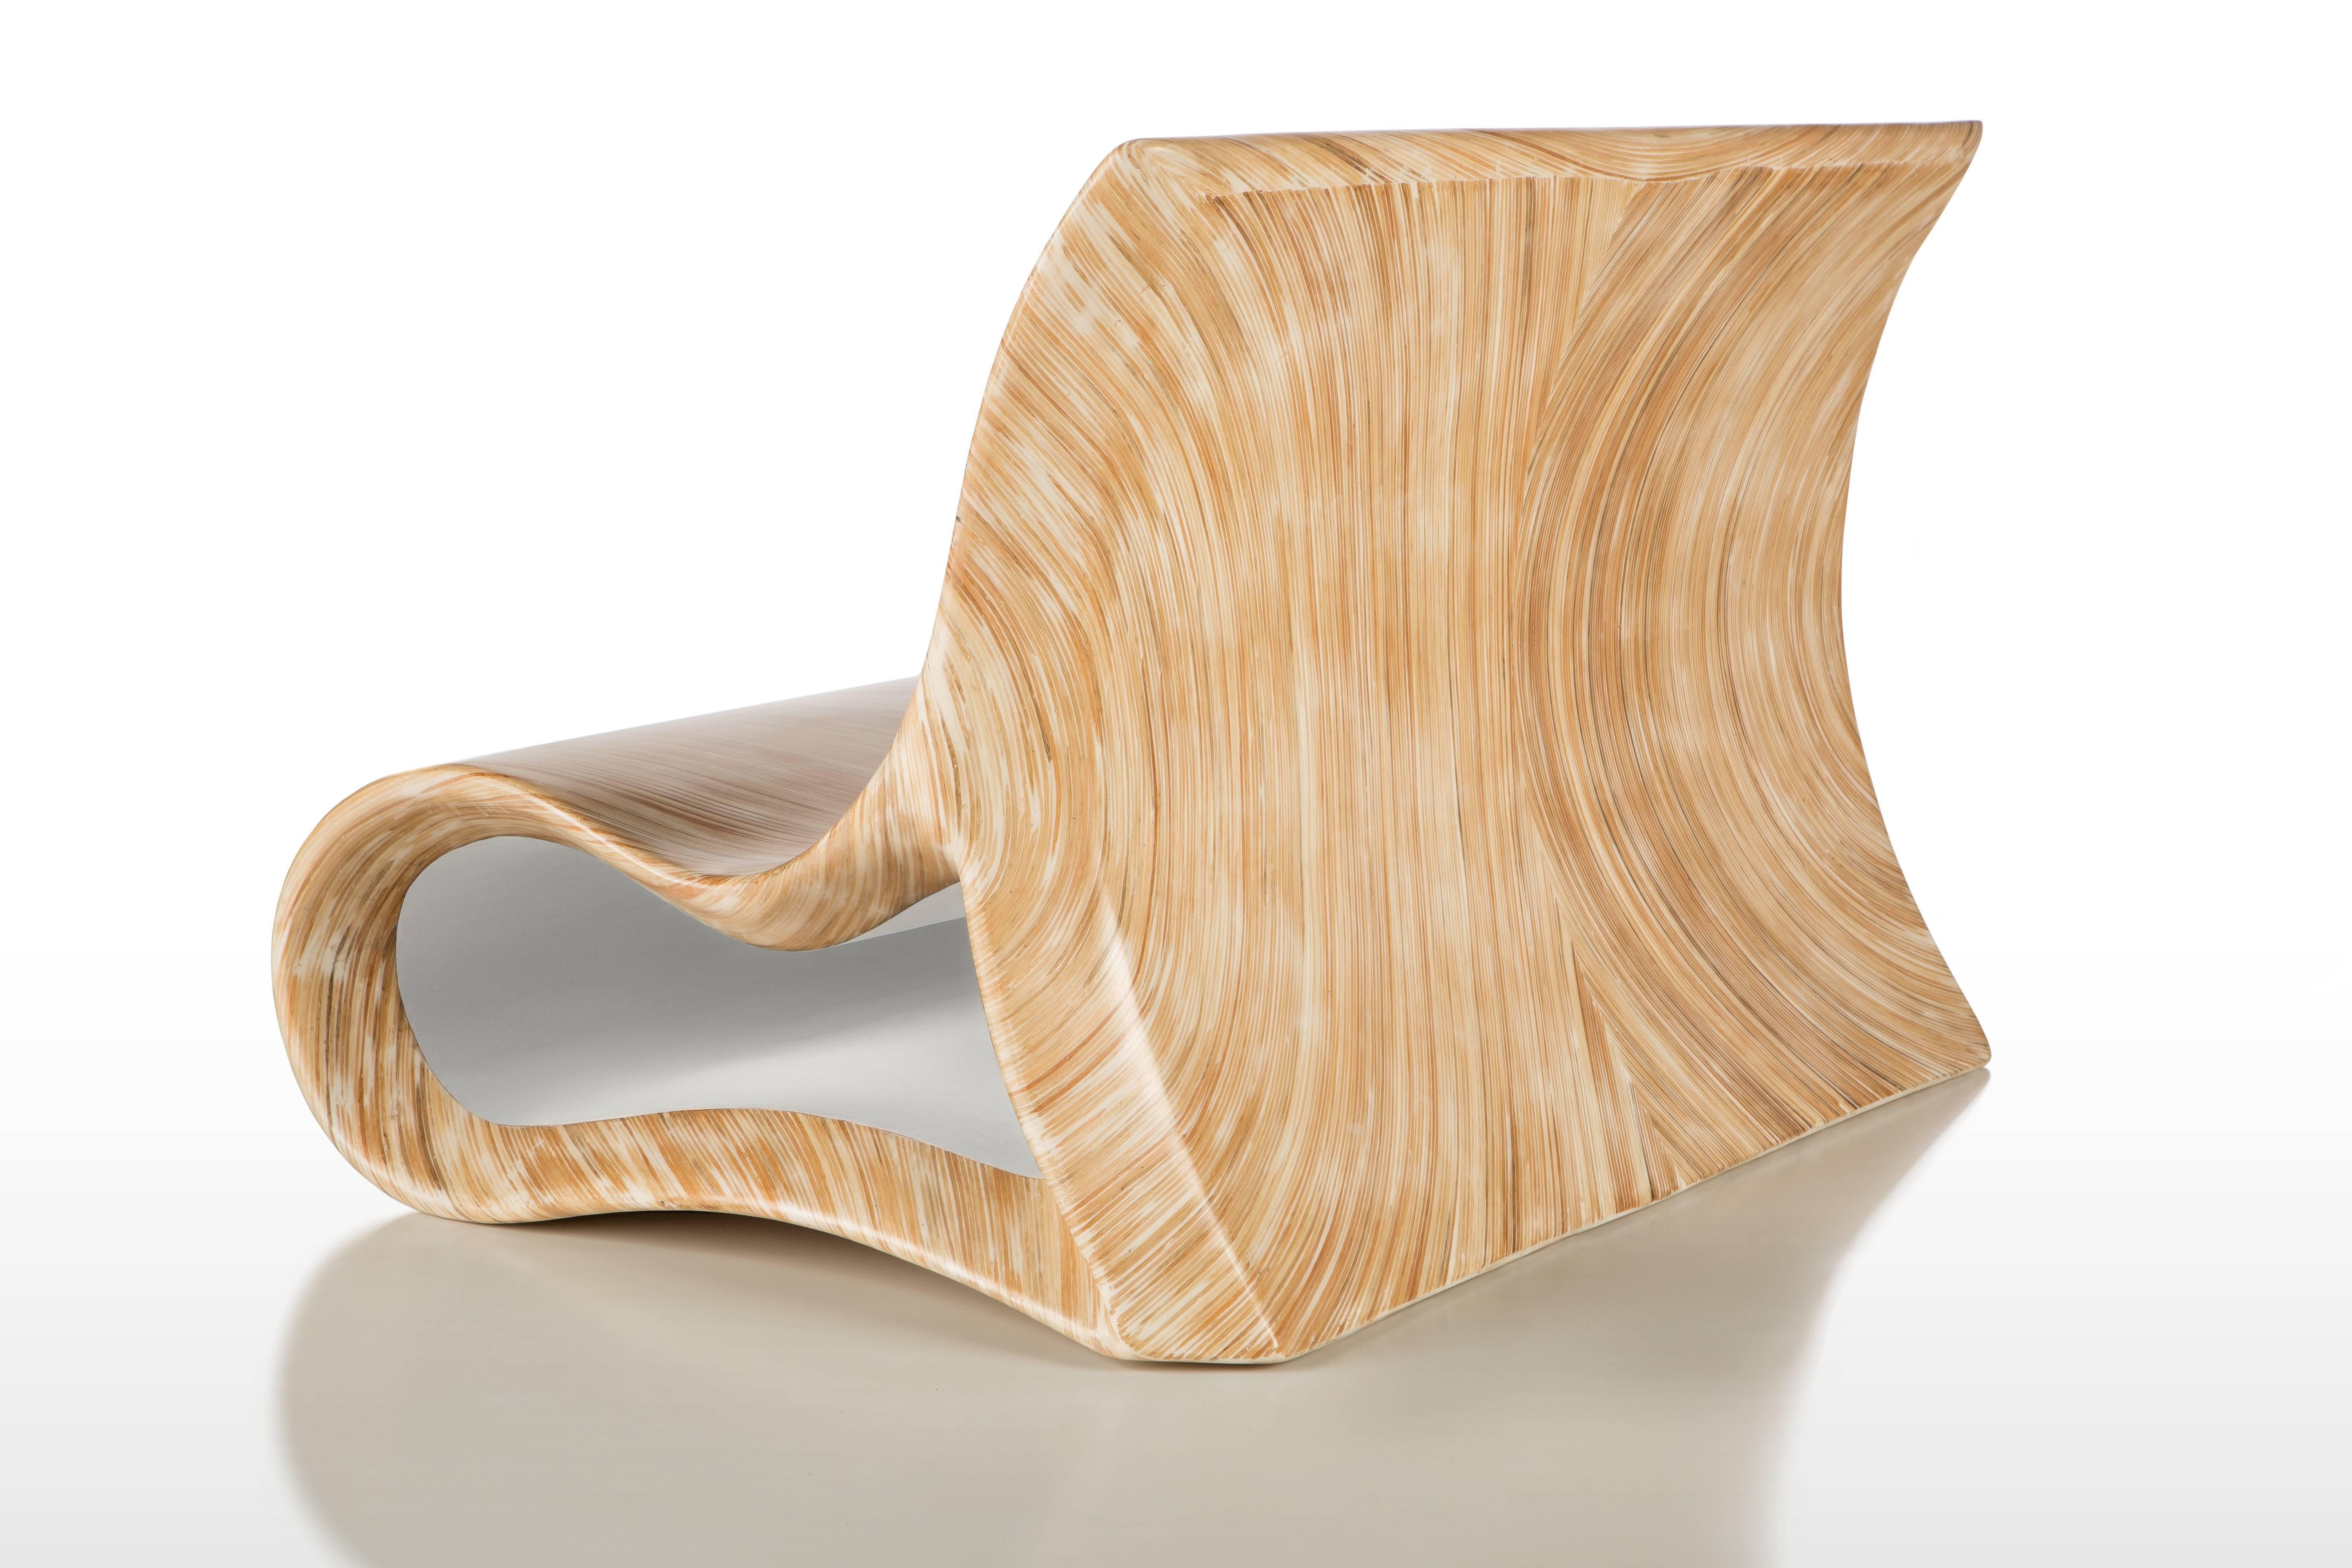 The Altoum Double sofa seater is a mesmerizing piece of furniture, with its meandering curves and seemingly endless tree rings. The shape of this seat takes inspiration from Op Art whilst the sophisticated wood lamination finish breathes life into